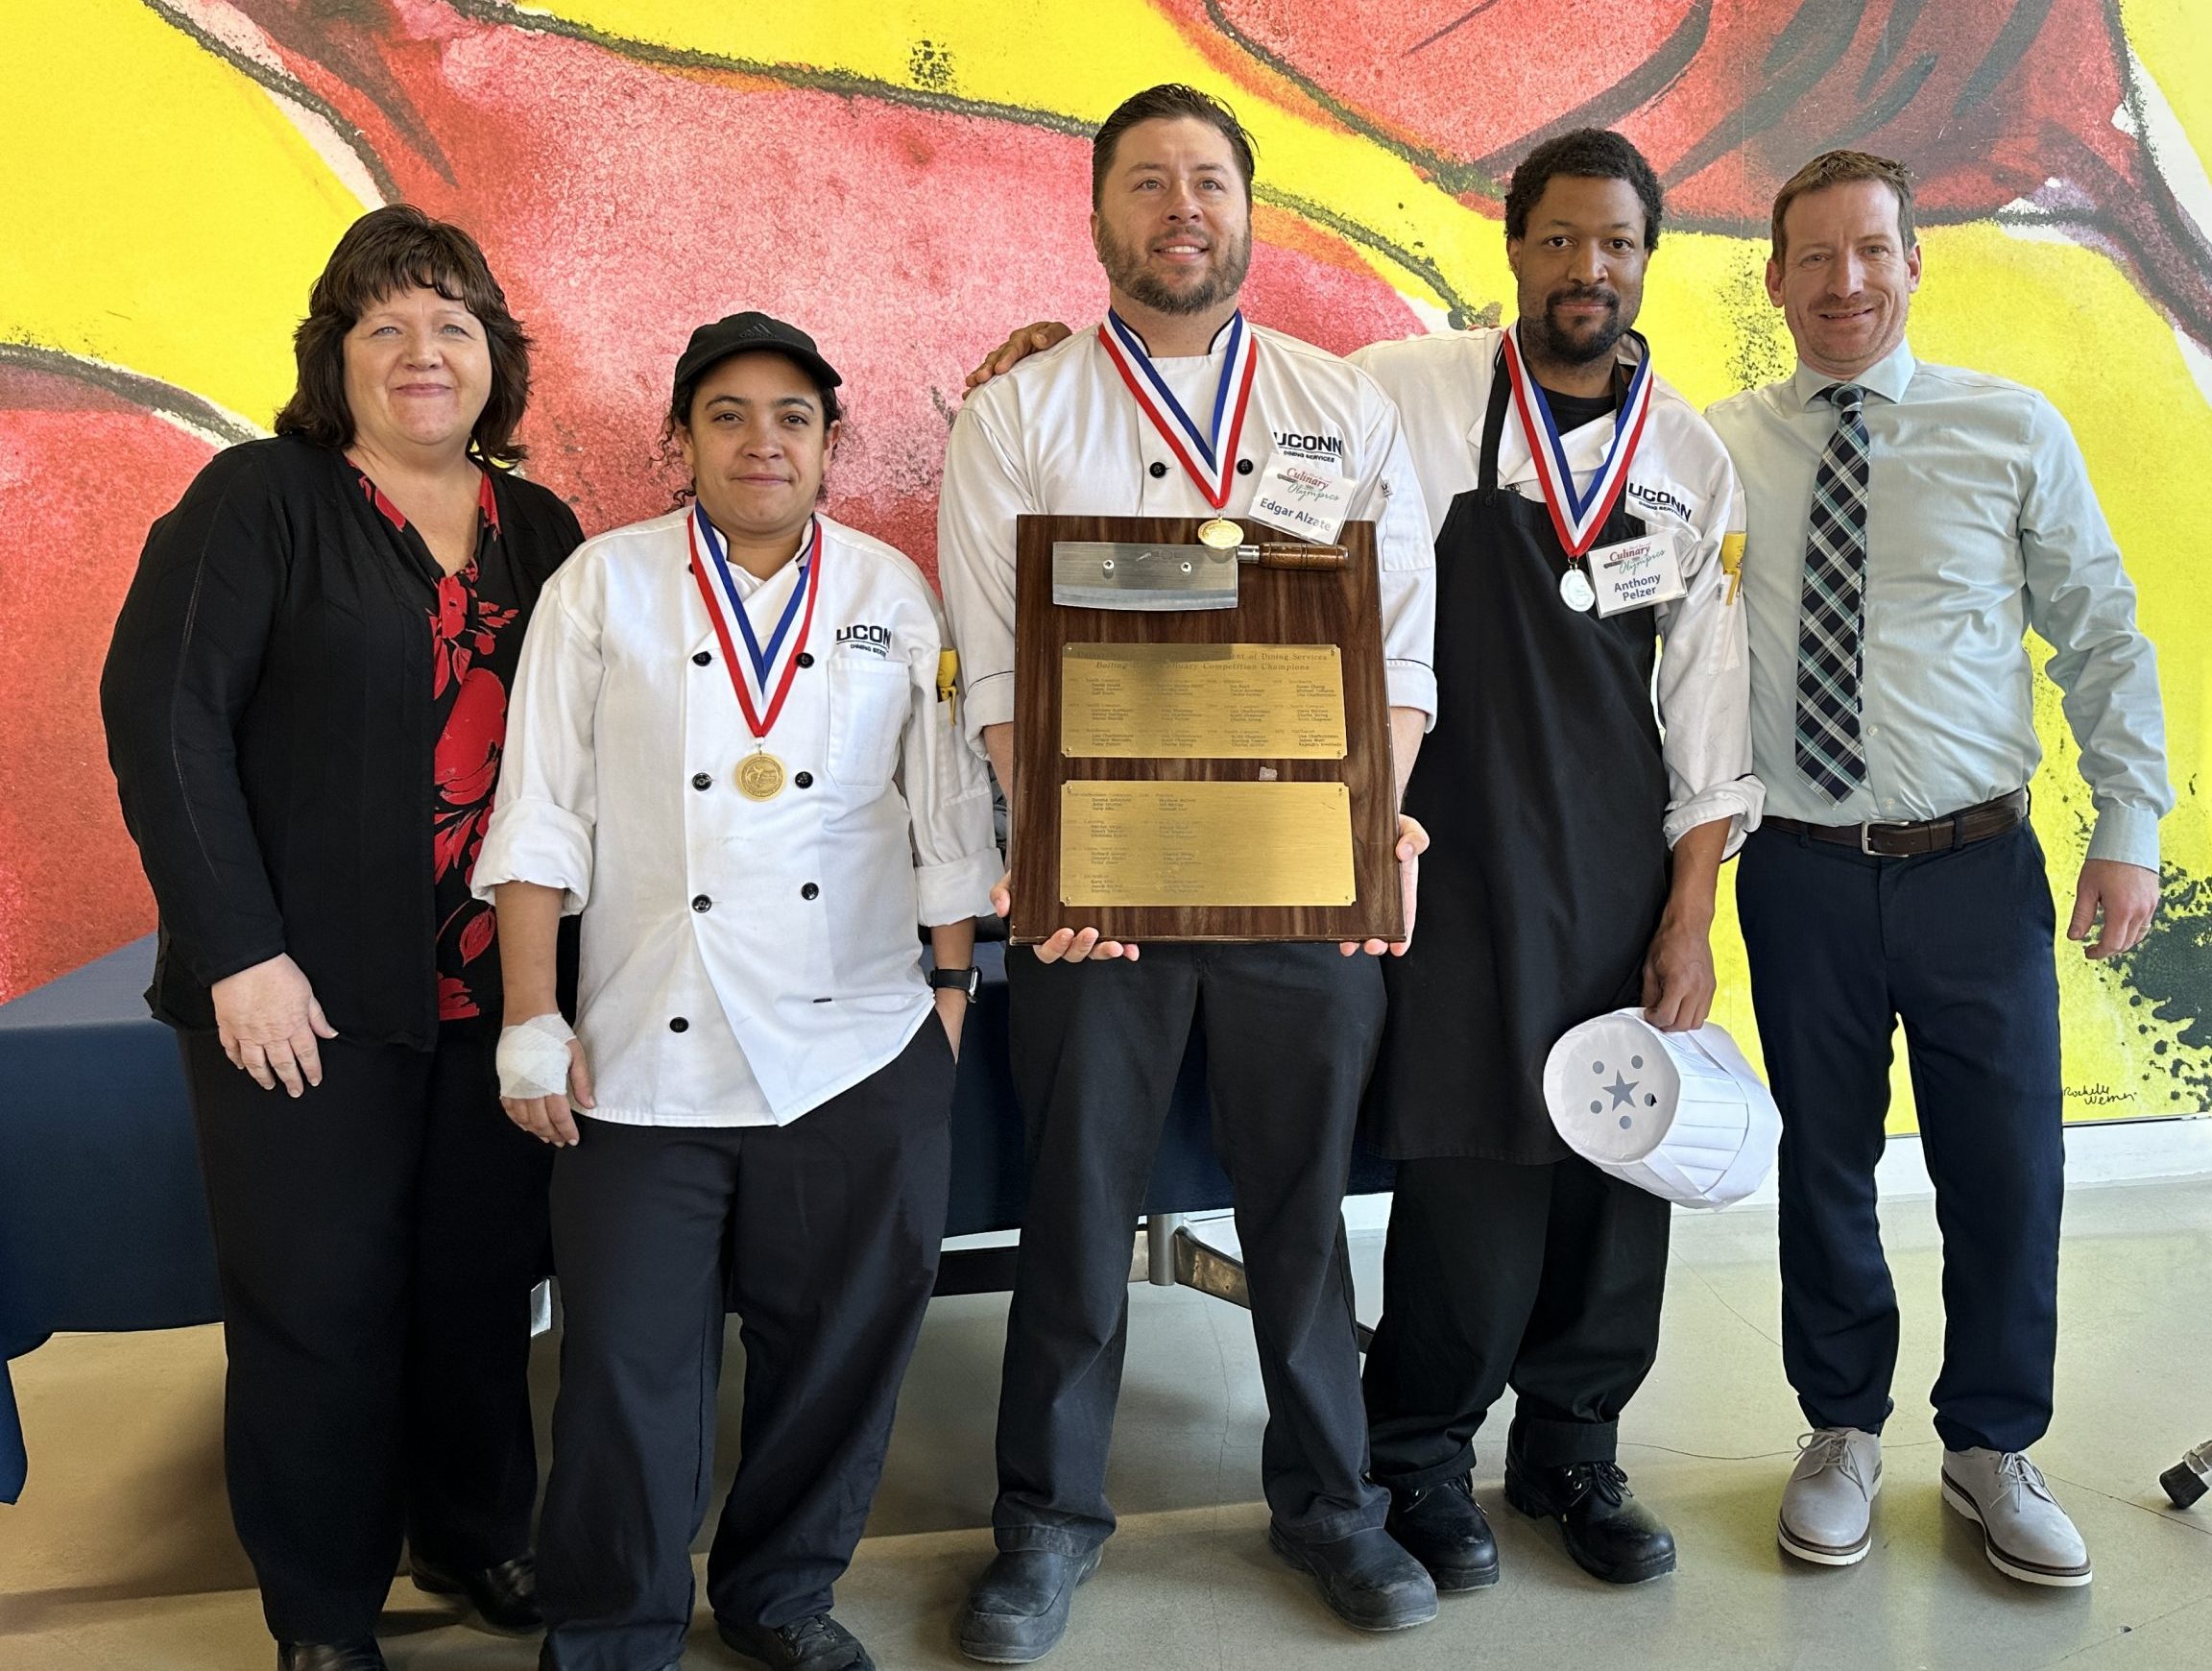 North Dining Hall takes home first place at the 22nd Annual Culinary Olympics Boiling Point Competition